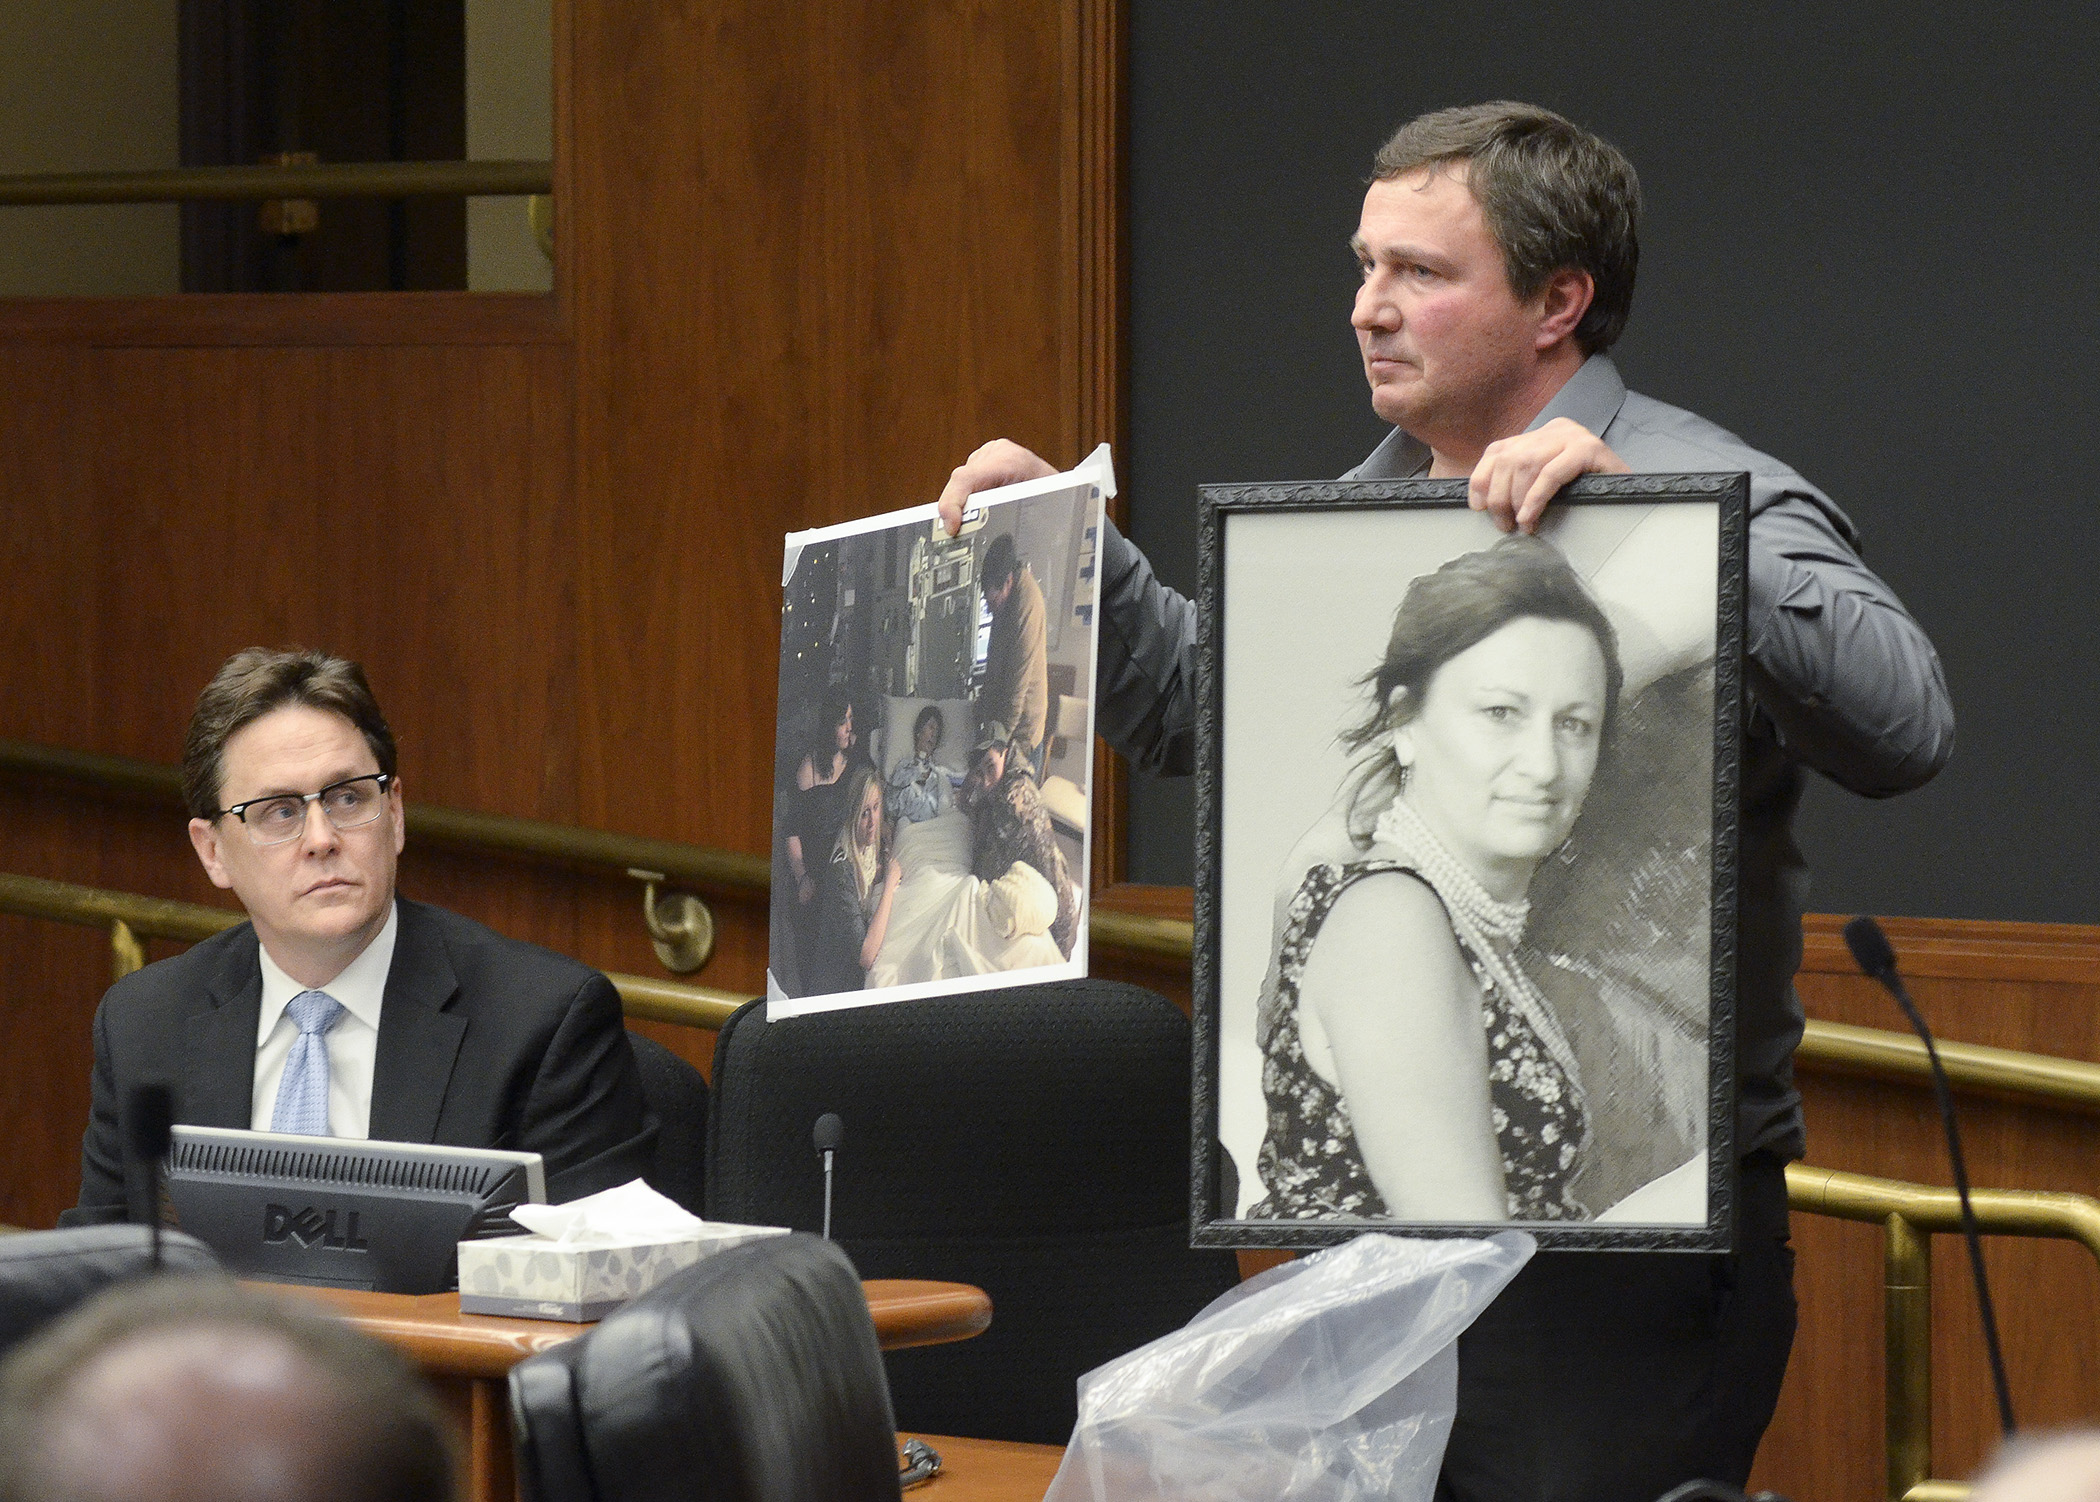 Chuck Dunker shows photos of his wife, Gail, who died of cancer on Jan. 9, 2015, during testimony for a bill sponsored by Rep. Matt Dean, left, to require Minnesota to transition to a federally facilitated health insurance exchange. Photo by Andrew VonBank